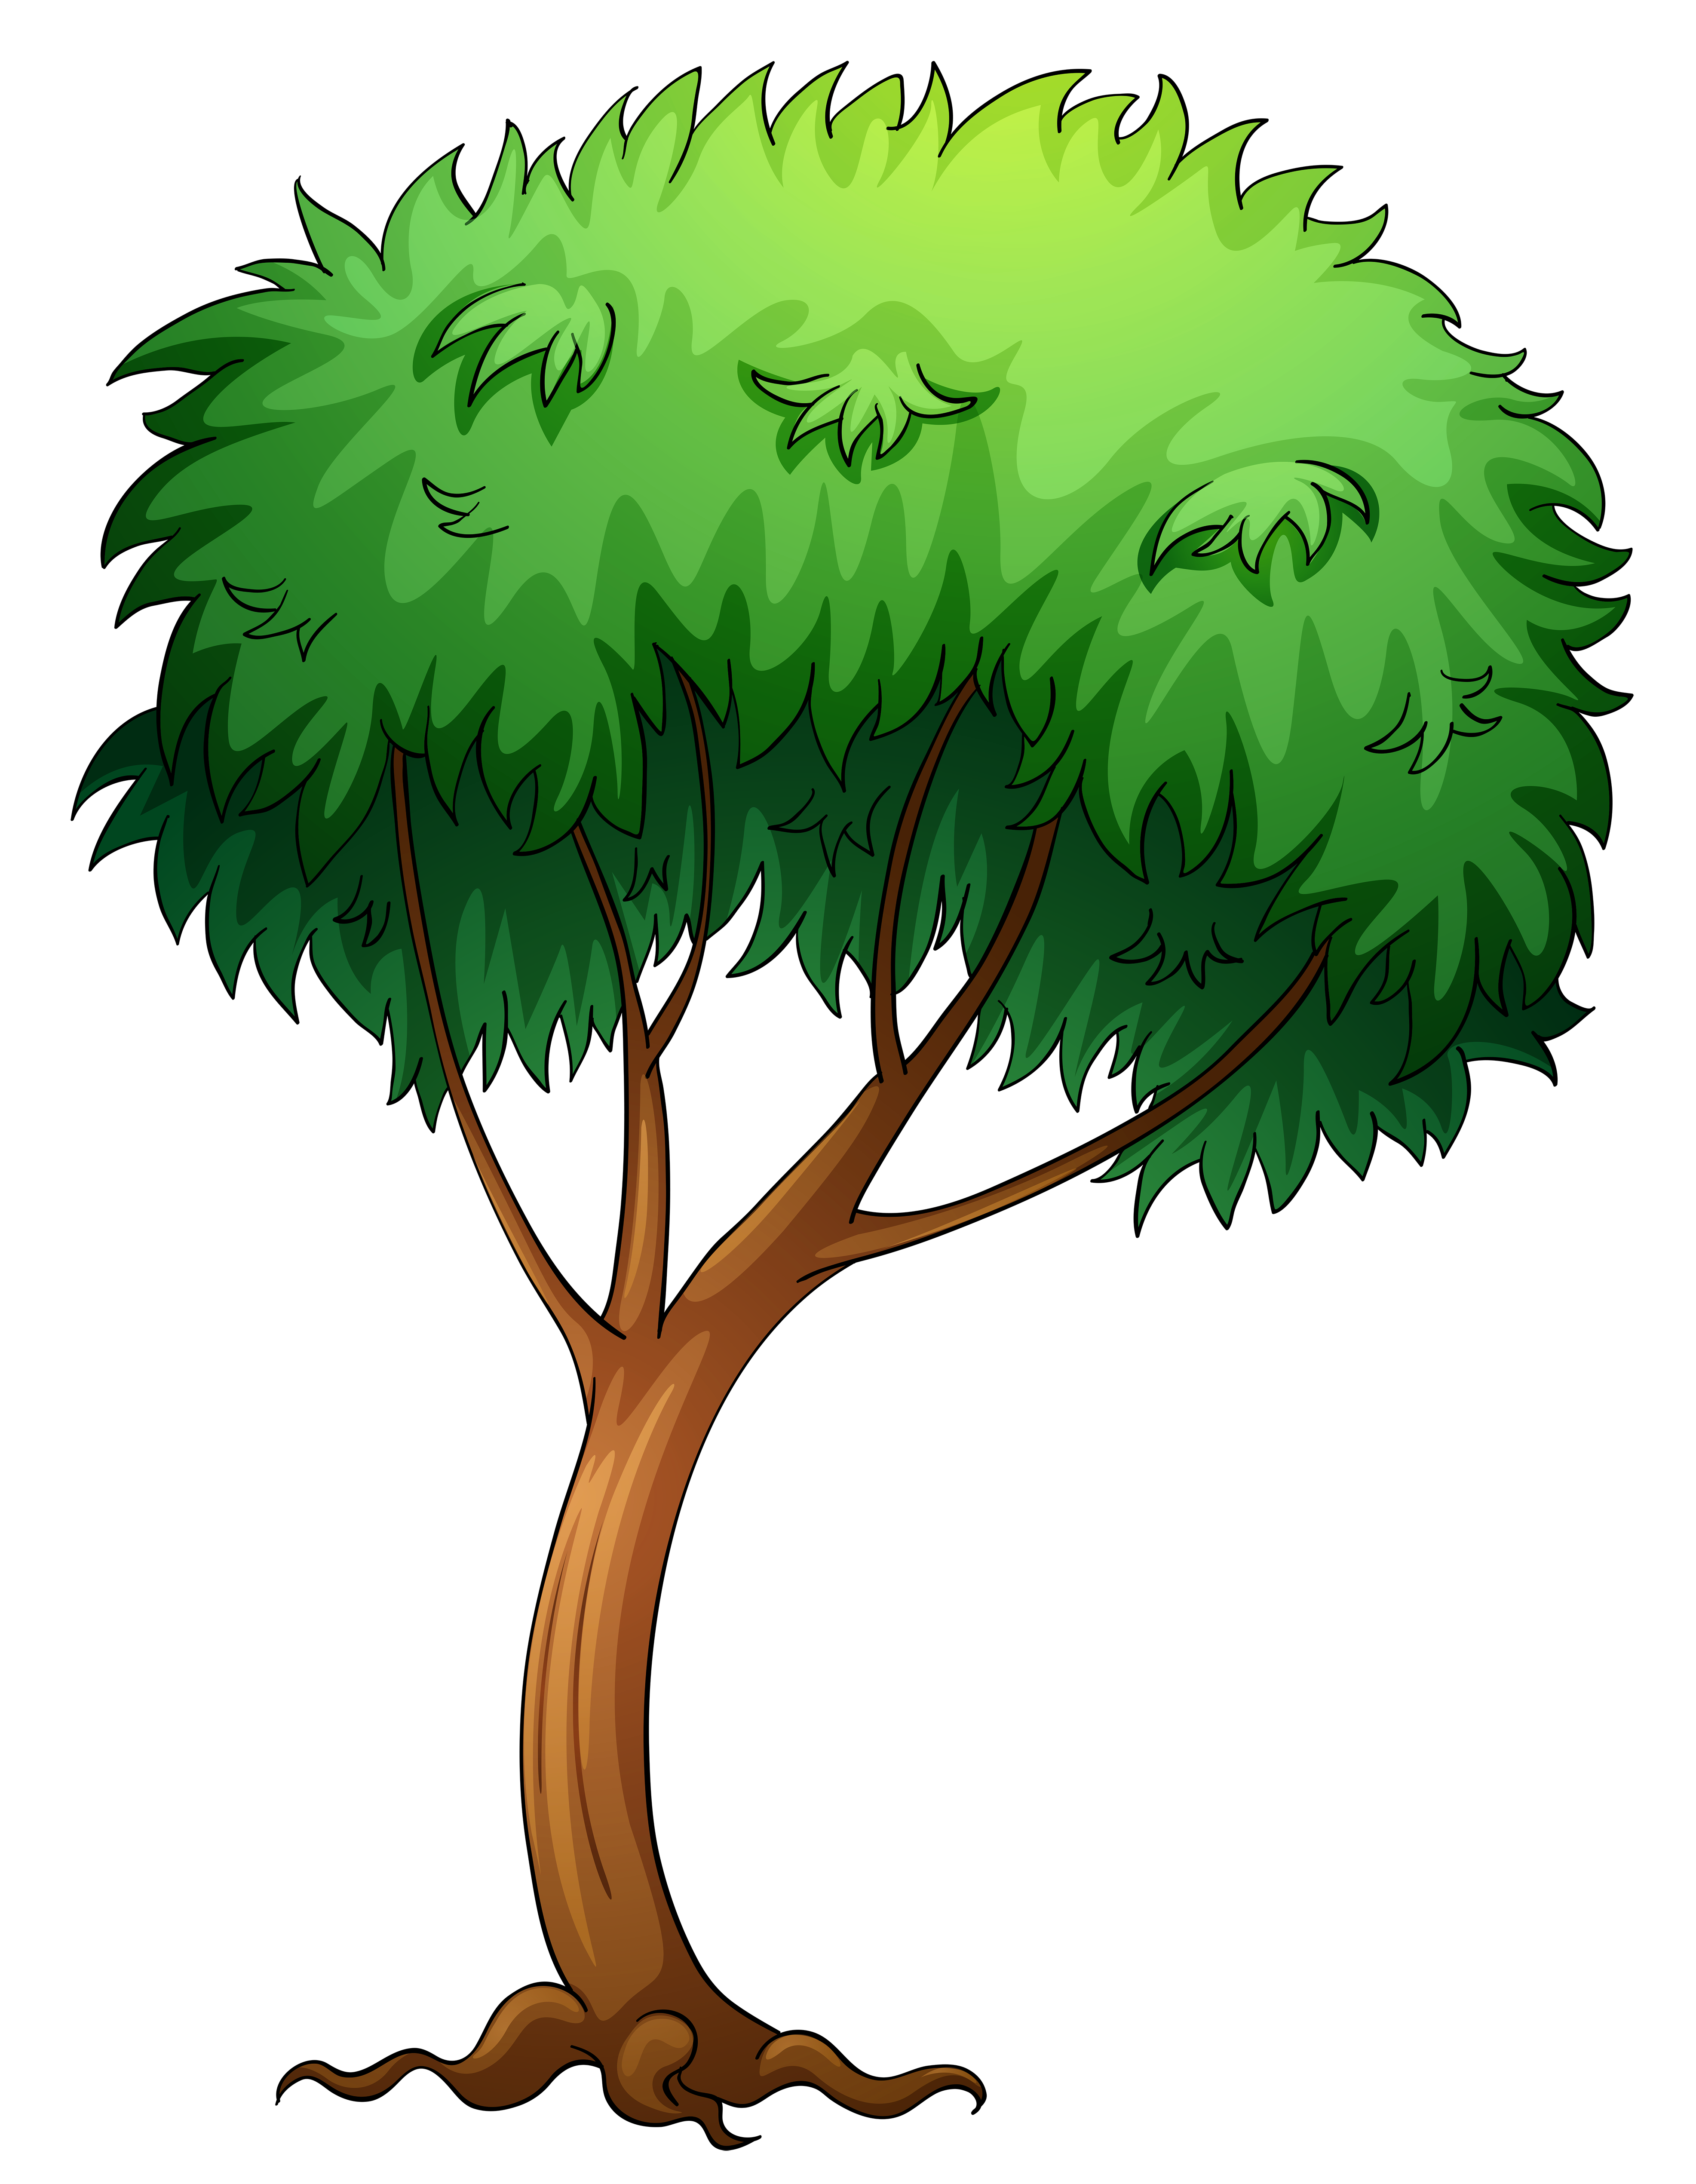 Free Tree Images, Download Free Tree Images png images, Free ClipArts